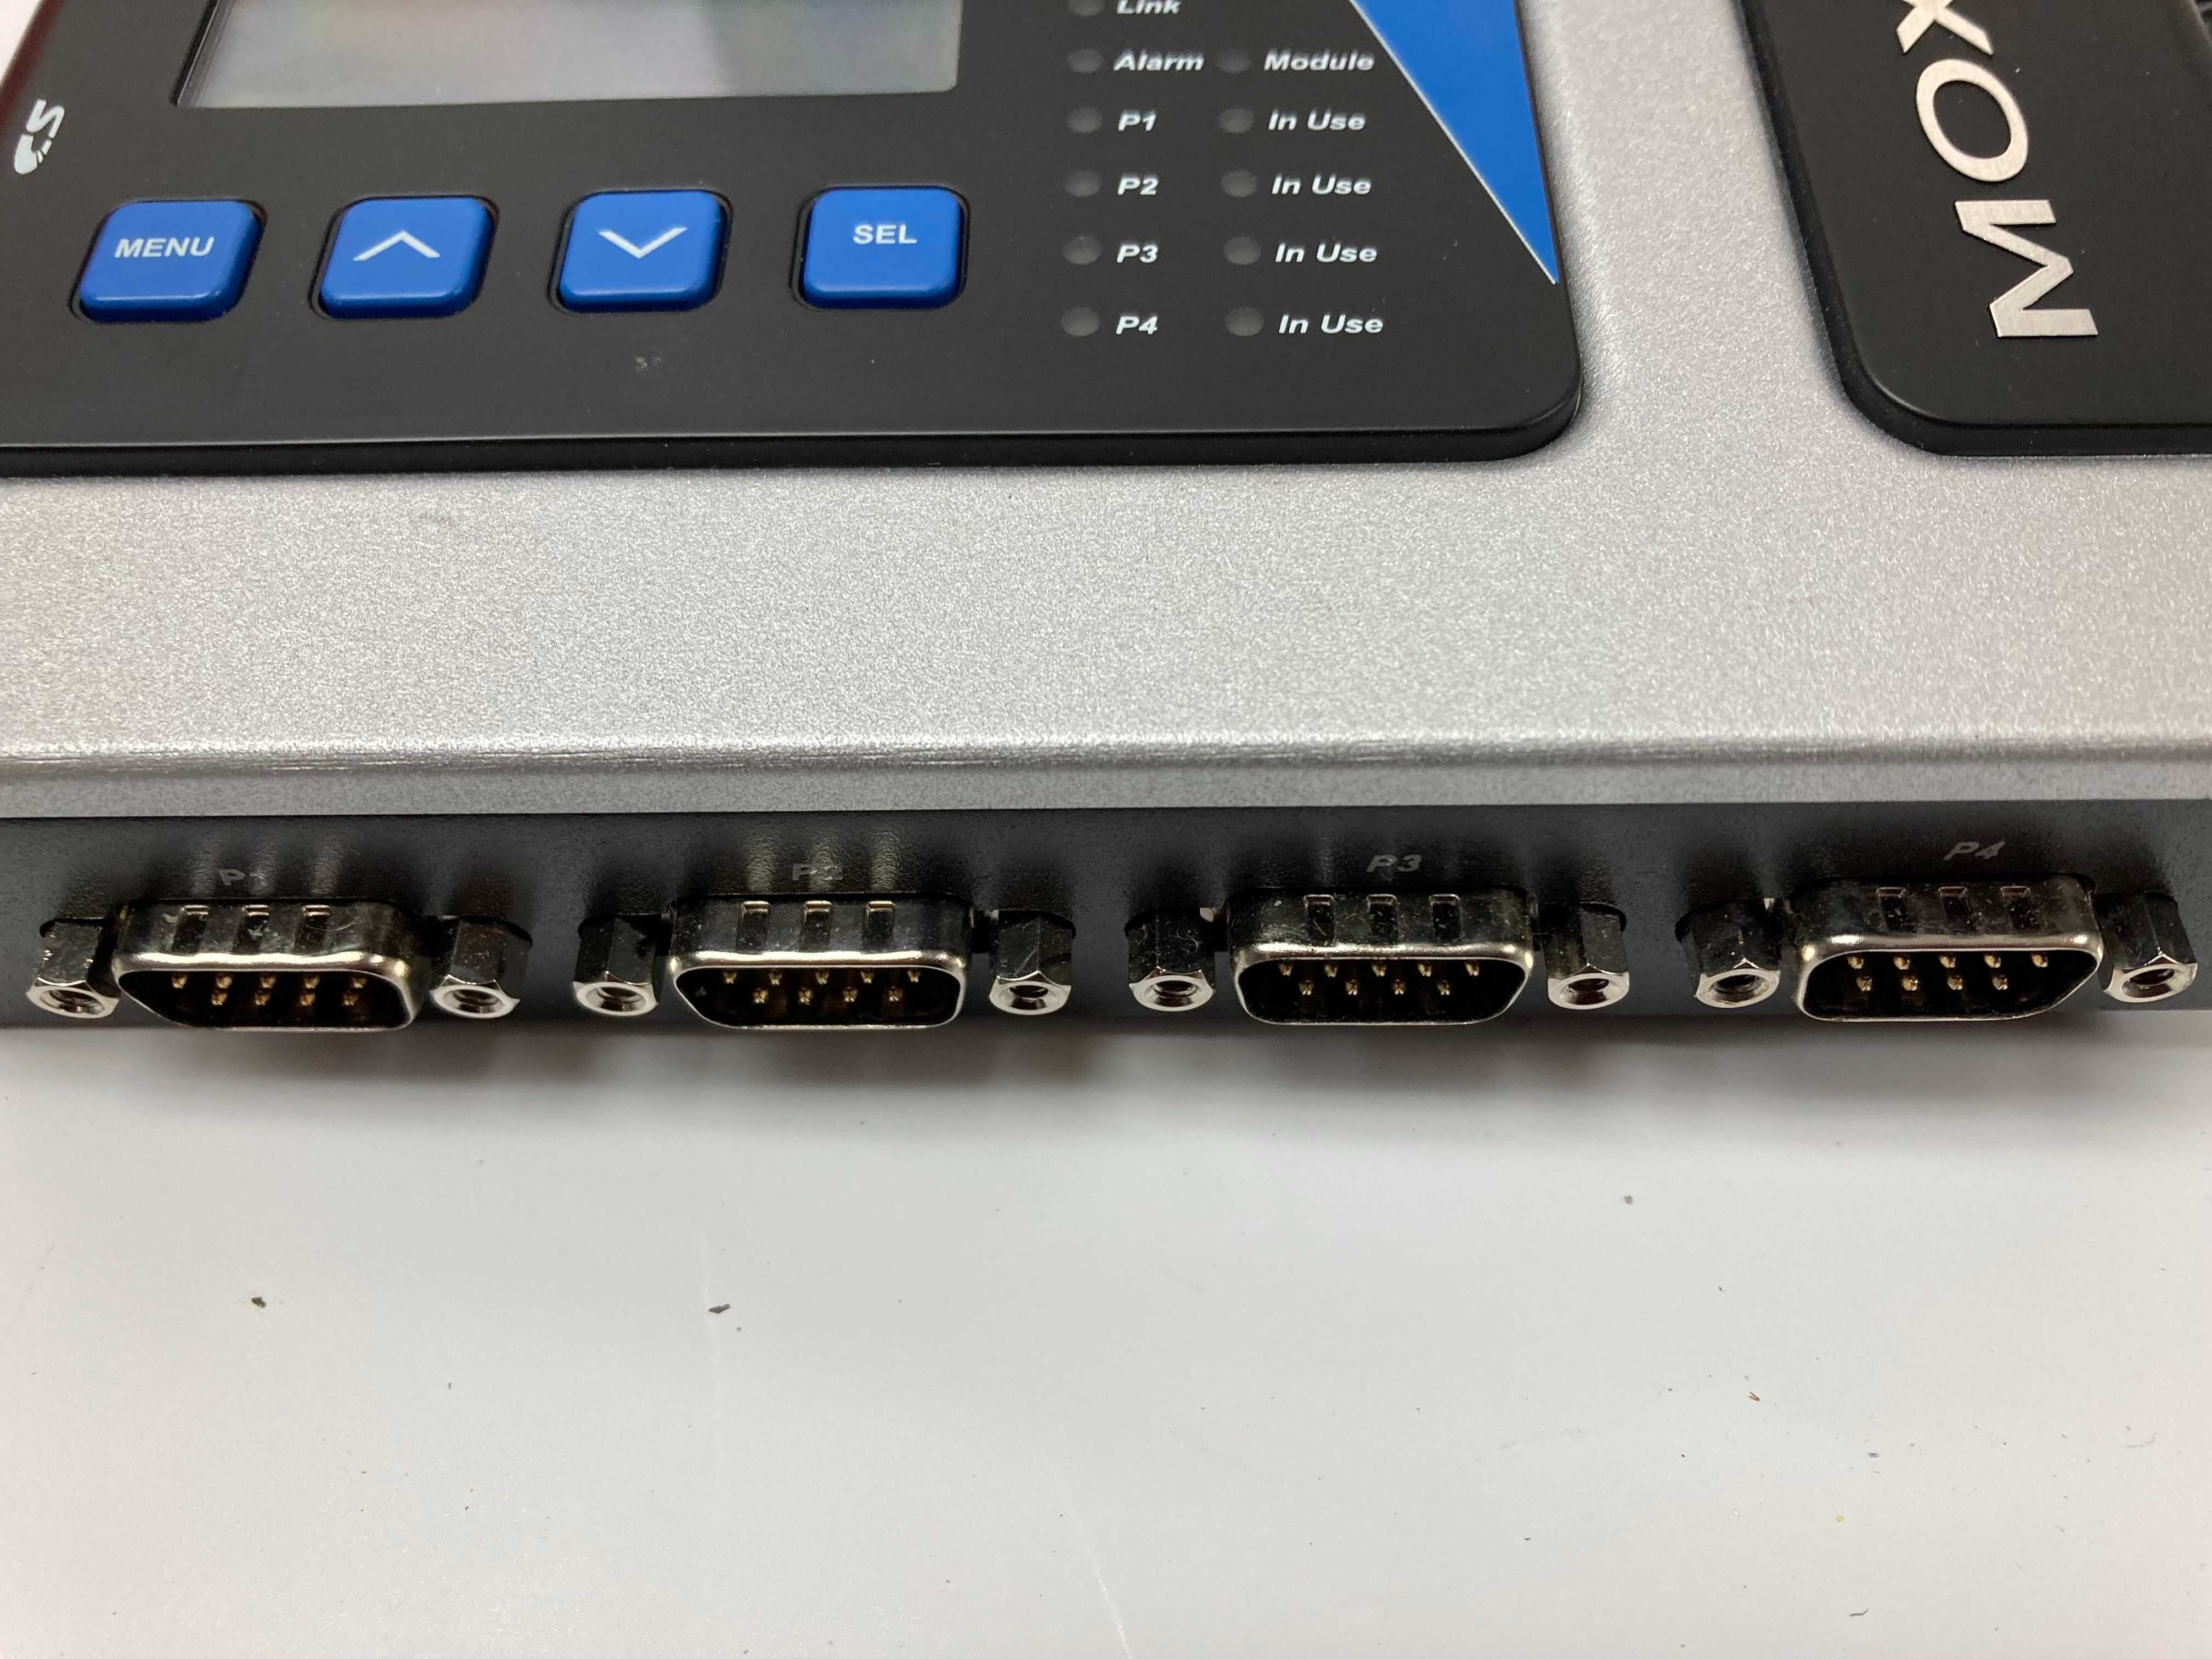 MOXA NPort 6450, 4-port RS-232/422/485 secure terminal servers